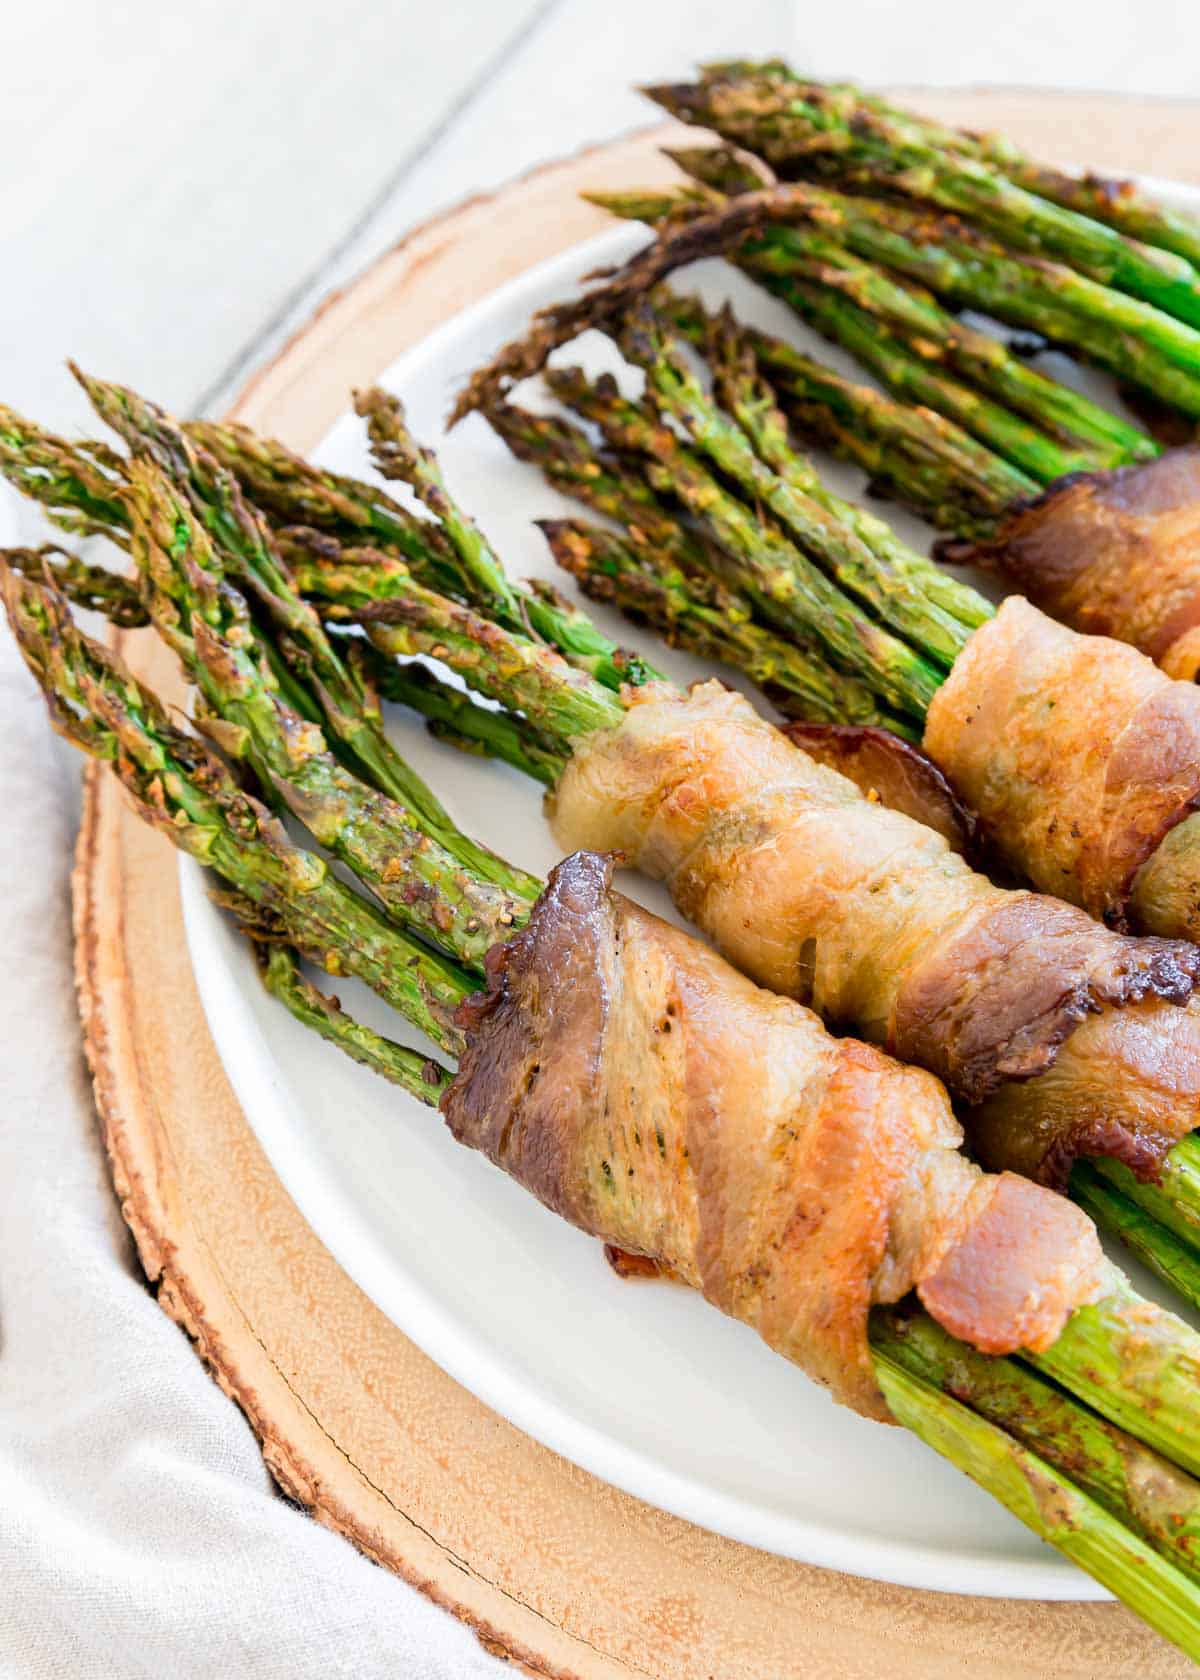 Air fryer bacon wrapped asparagus bundles on a white plate with wooden surface beneath.